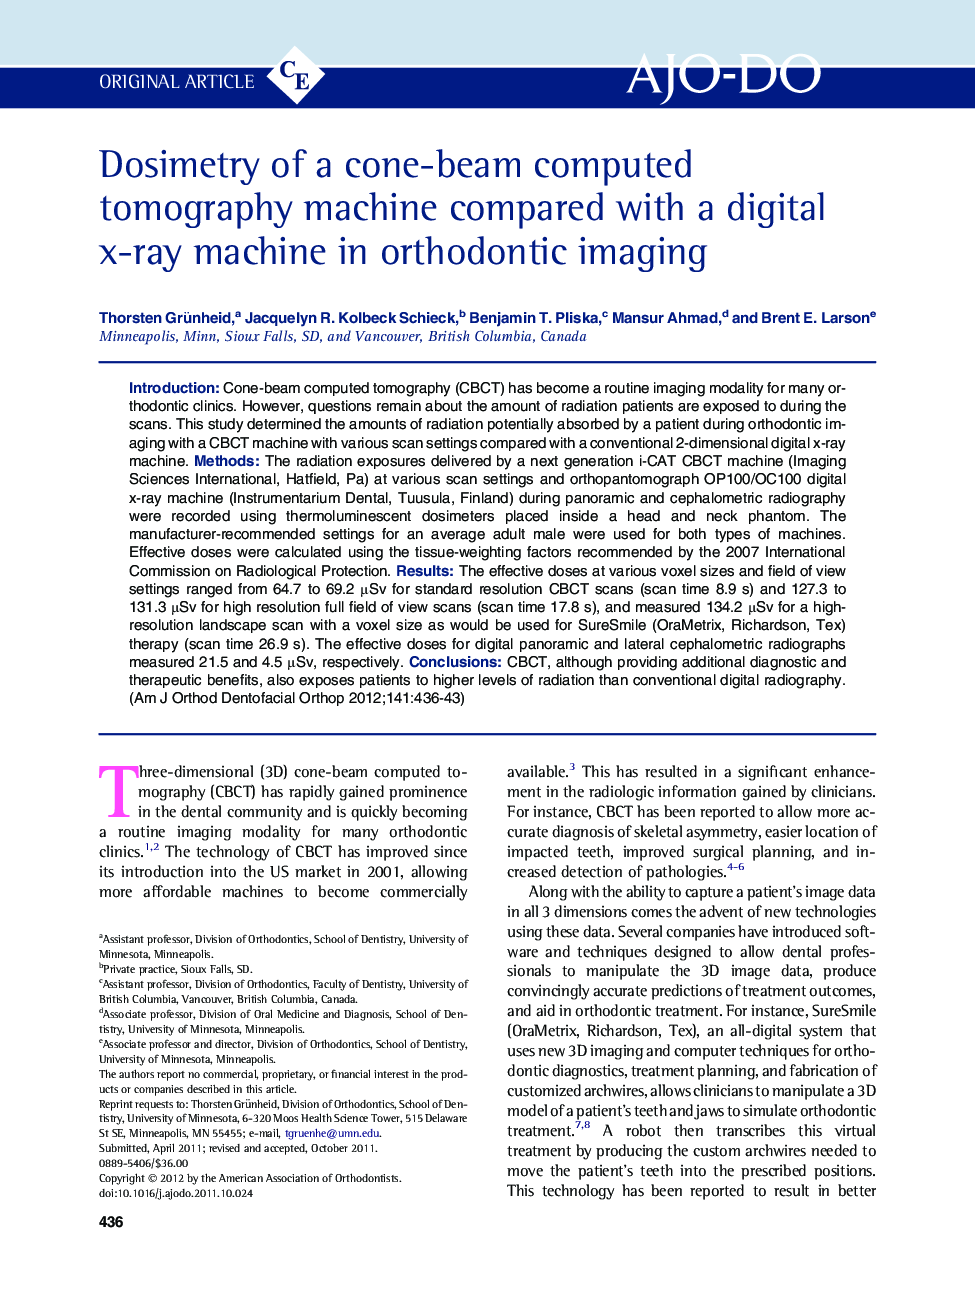 Dosimetry of a cone-beam computed tomography machine compared with a digital x-ray machine in orthodontic imaging 